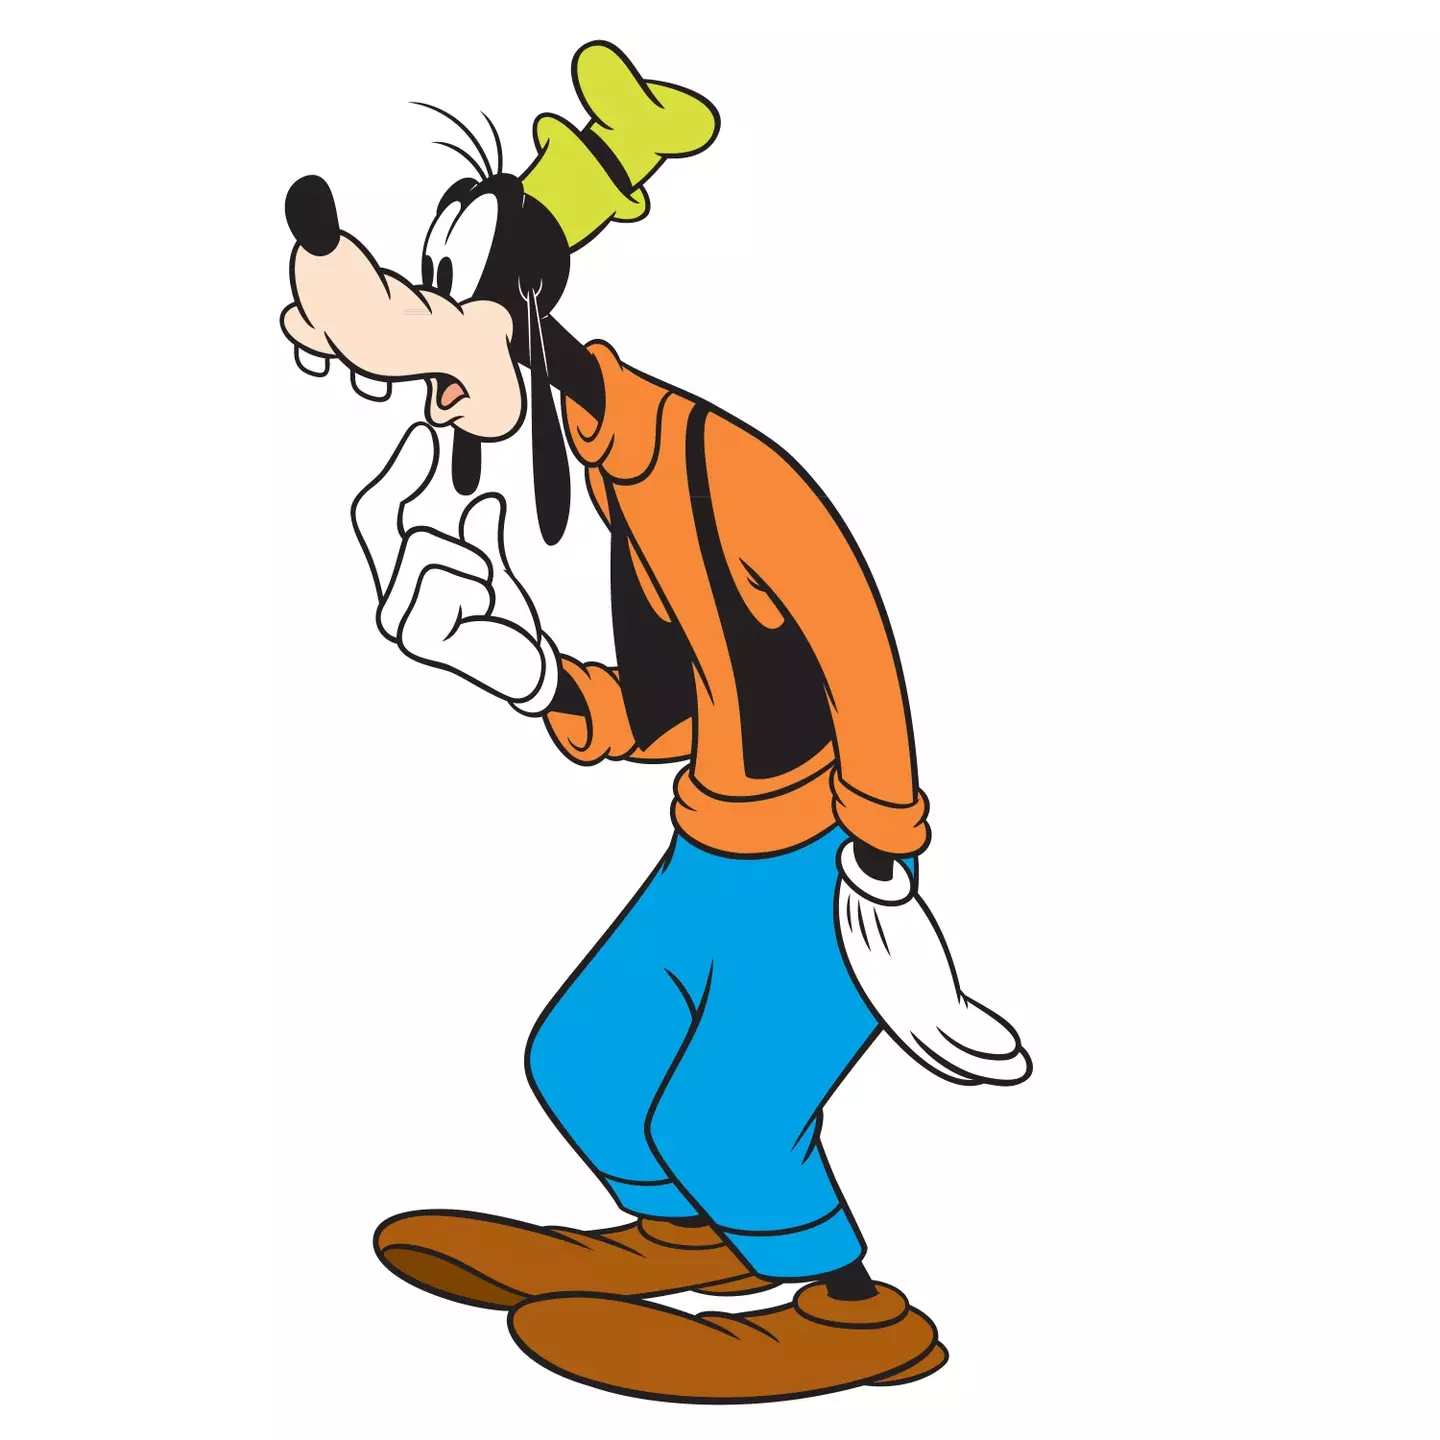 Many Disney fans have been left stumped by whether or not Goofy is a dog.